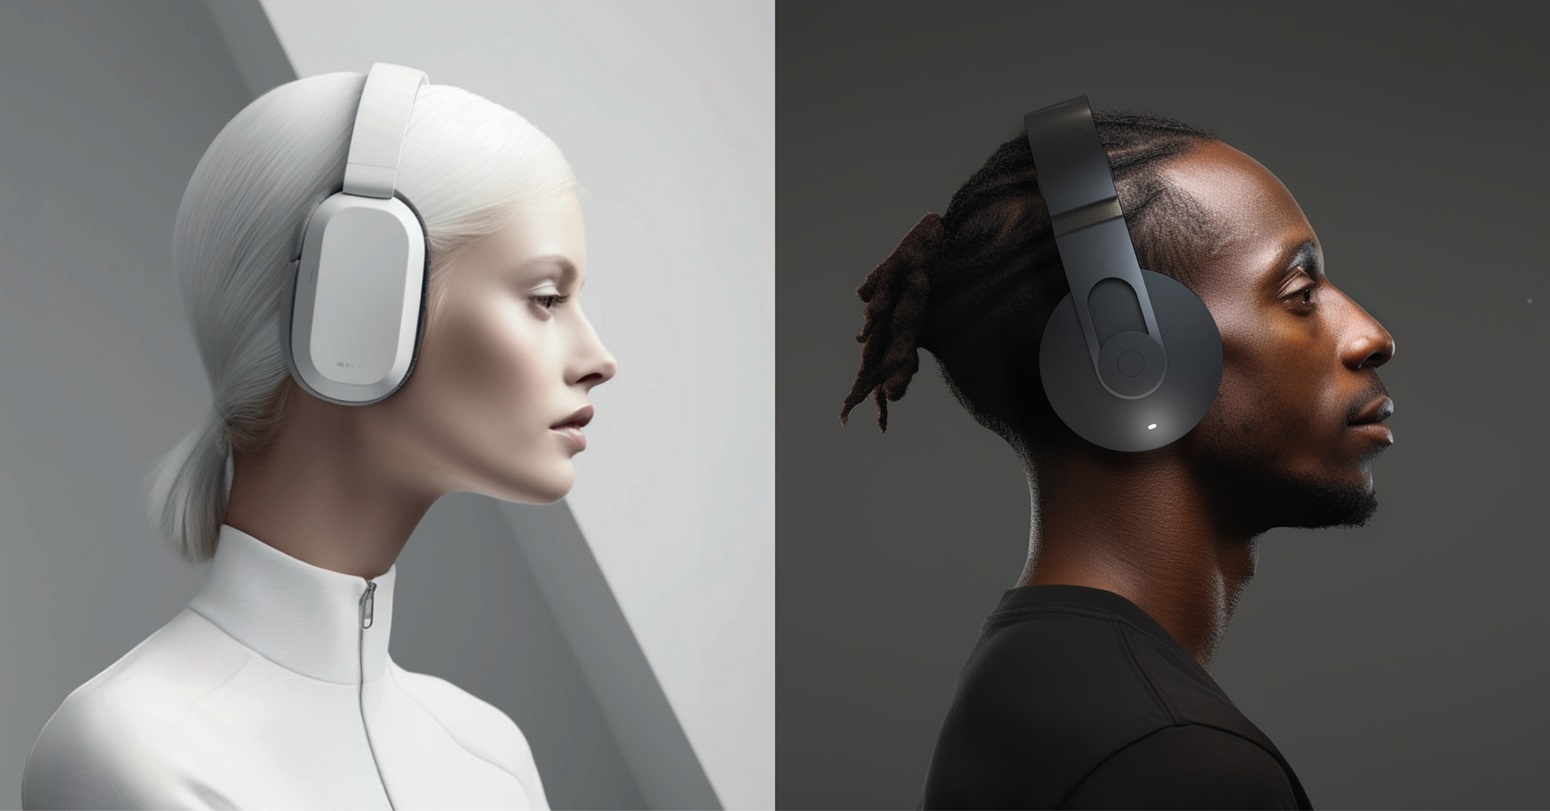 on the left hand-side a woman with white headphones, on the right hand-side a man with black headphones